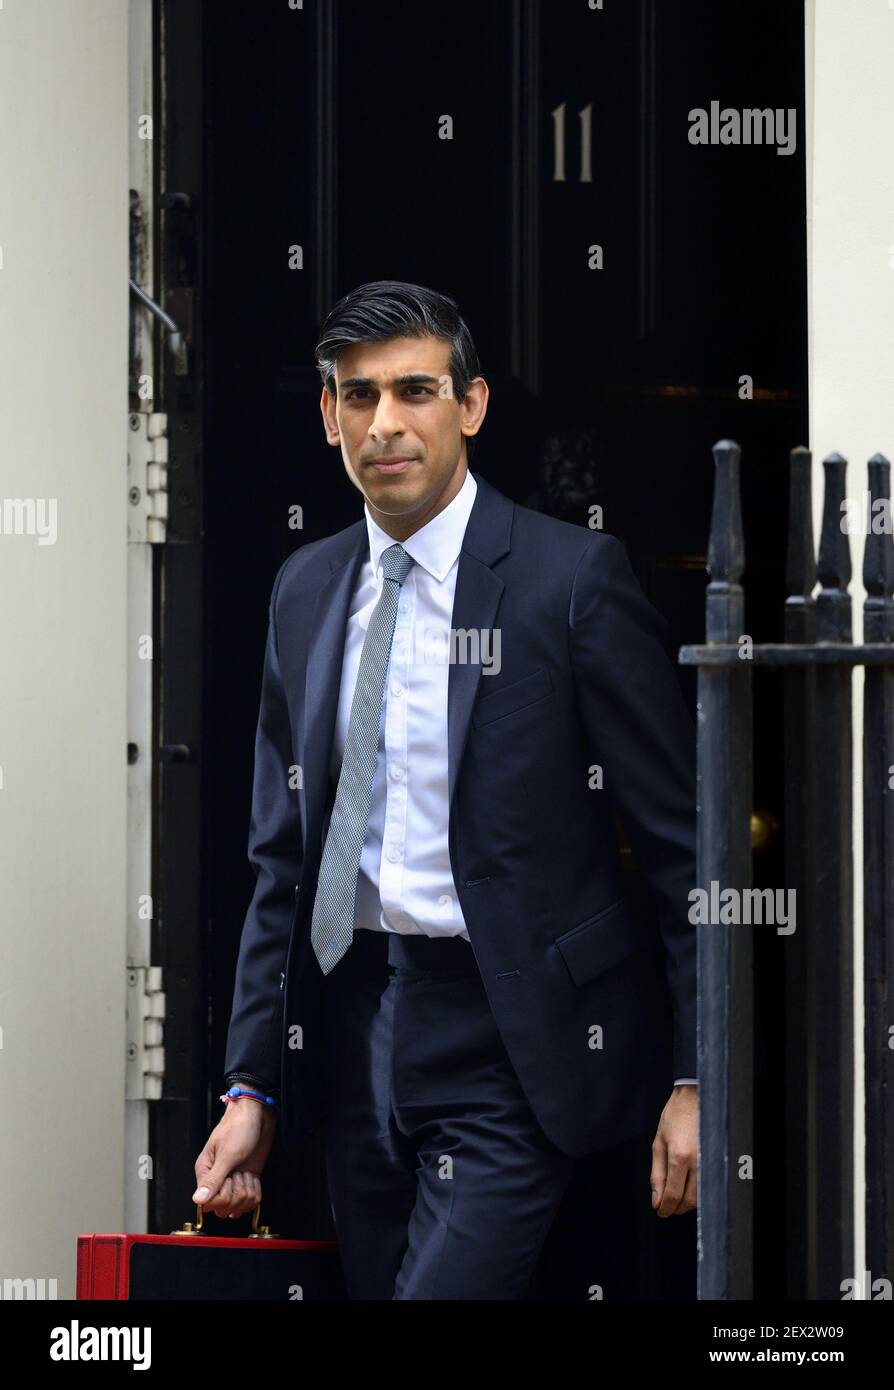 Rishi Sunak MP - Chancellor of the Exchequer - leaving Downing Street on Budget Day, 3rd March 2021 Stock Photo